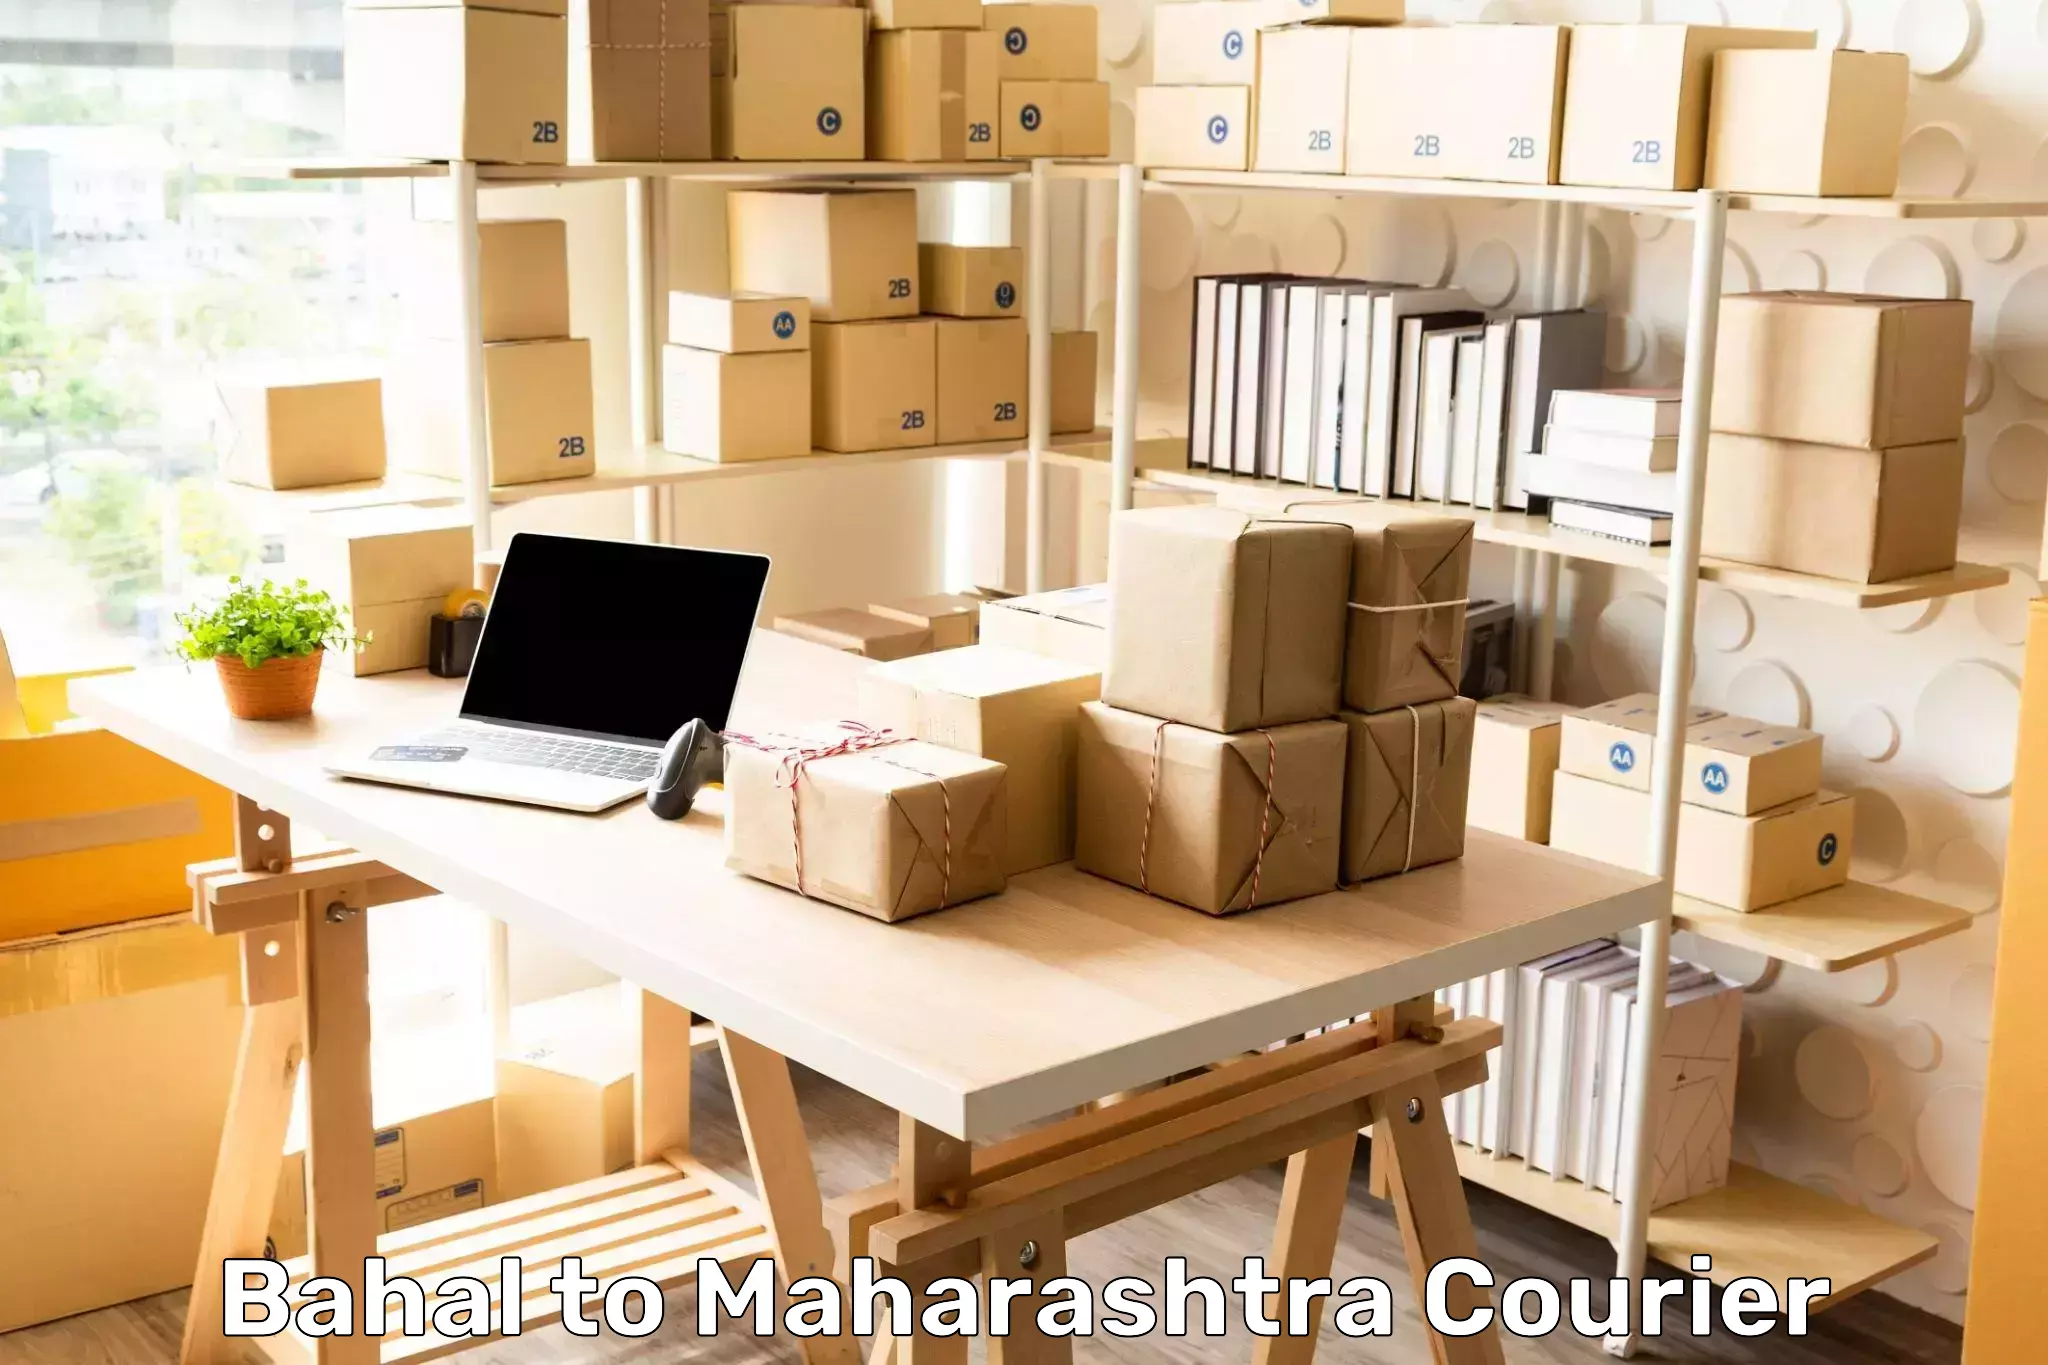 Reliable parcel services in Bahal to Maharashtra